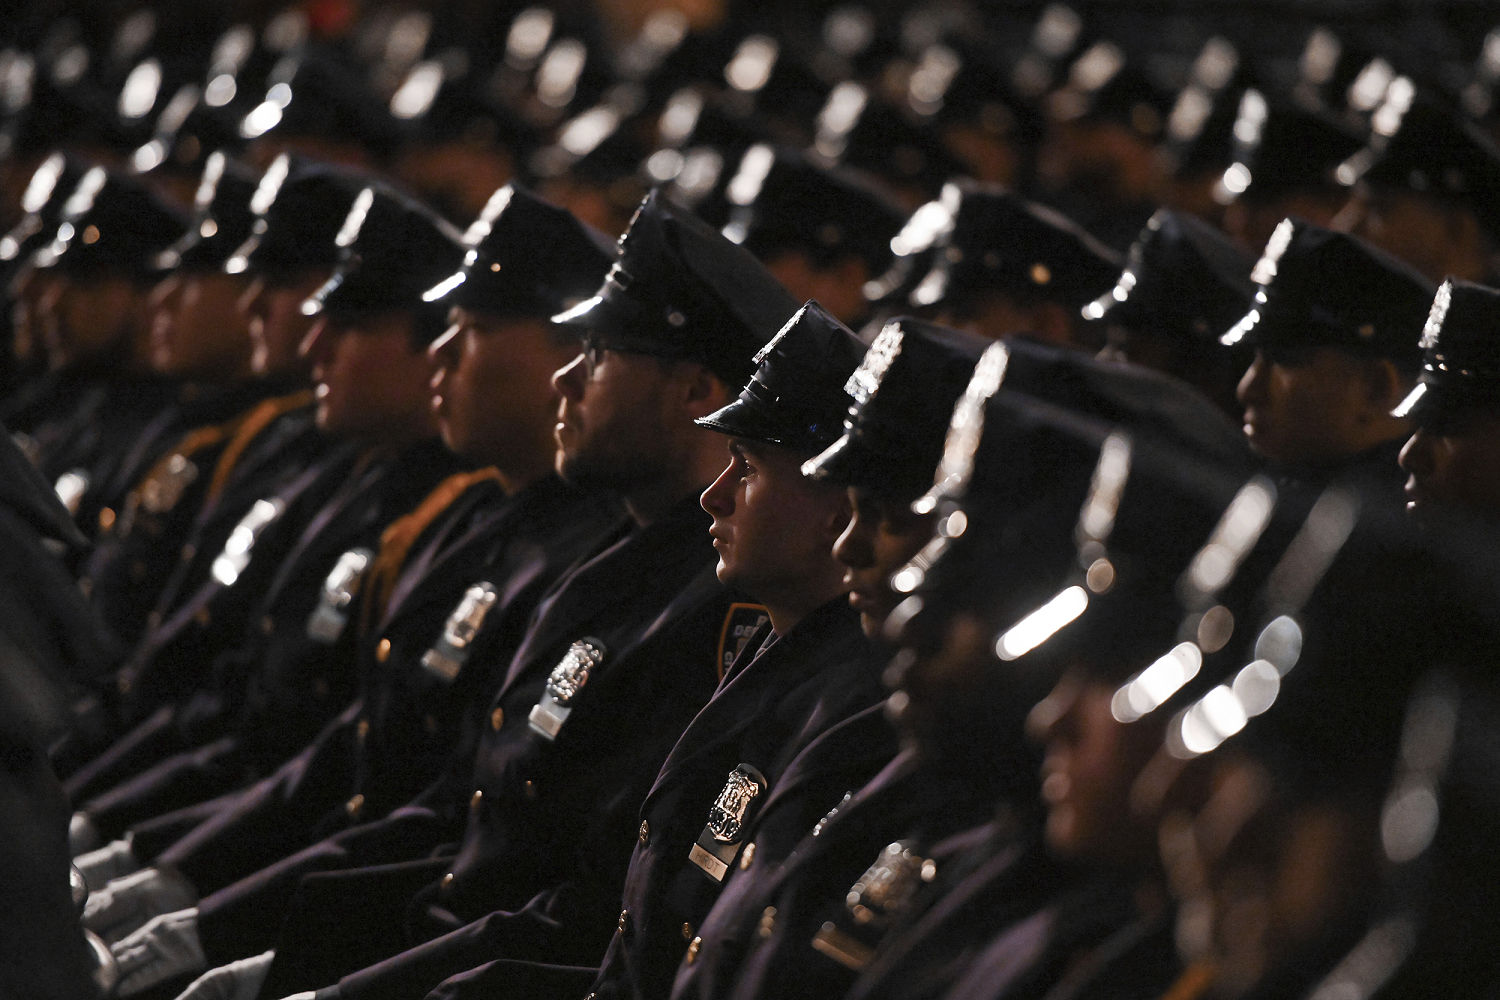 Police officer hiring in U.S. increases in 2023 after years of decline, survey shows